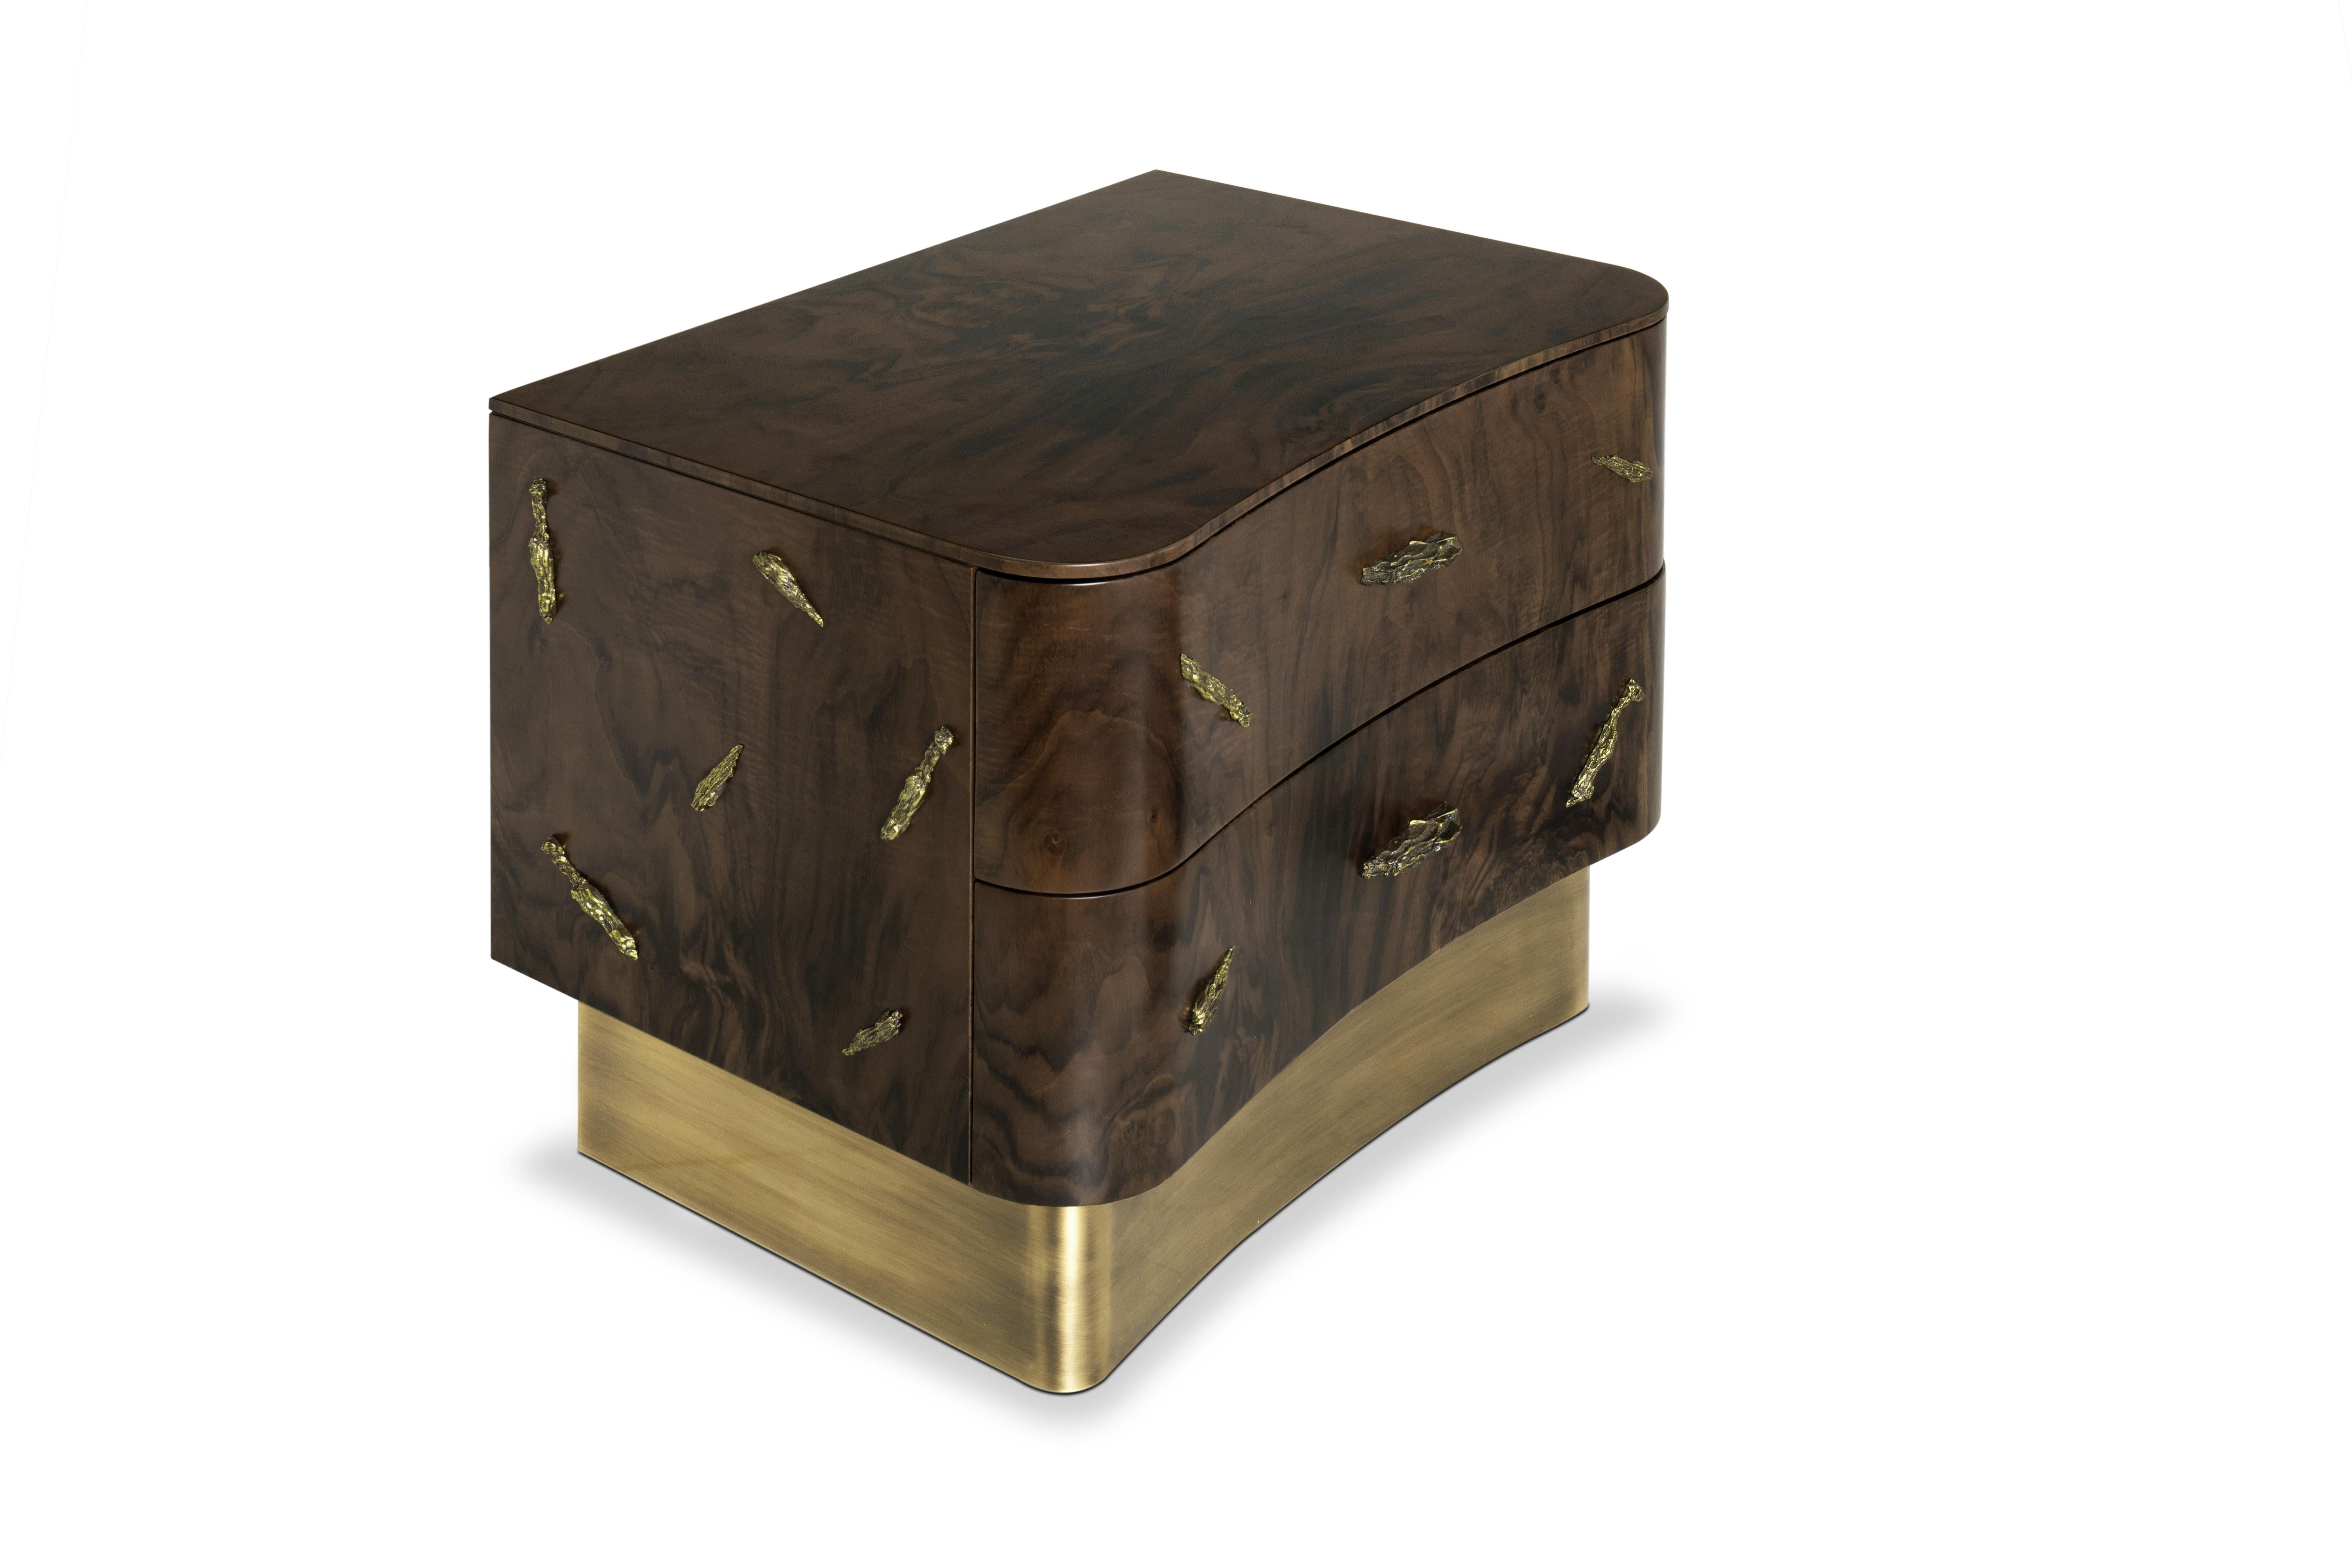 Baraka is an ancient Sufi word that means ''a blessing - as the breath -, or essence of life'' from which the evolutionary process unfolds. Charismatic by its never-ending contrasts between ancient and contemporary lines, Baraka bedside table main